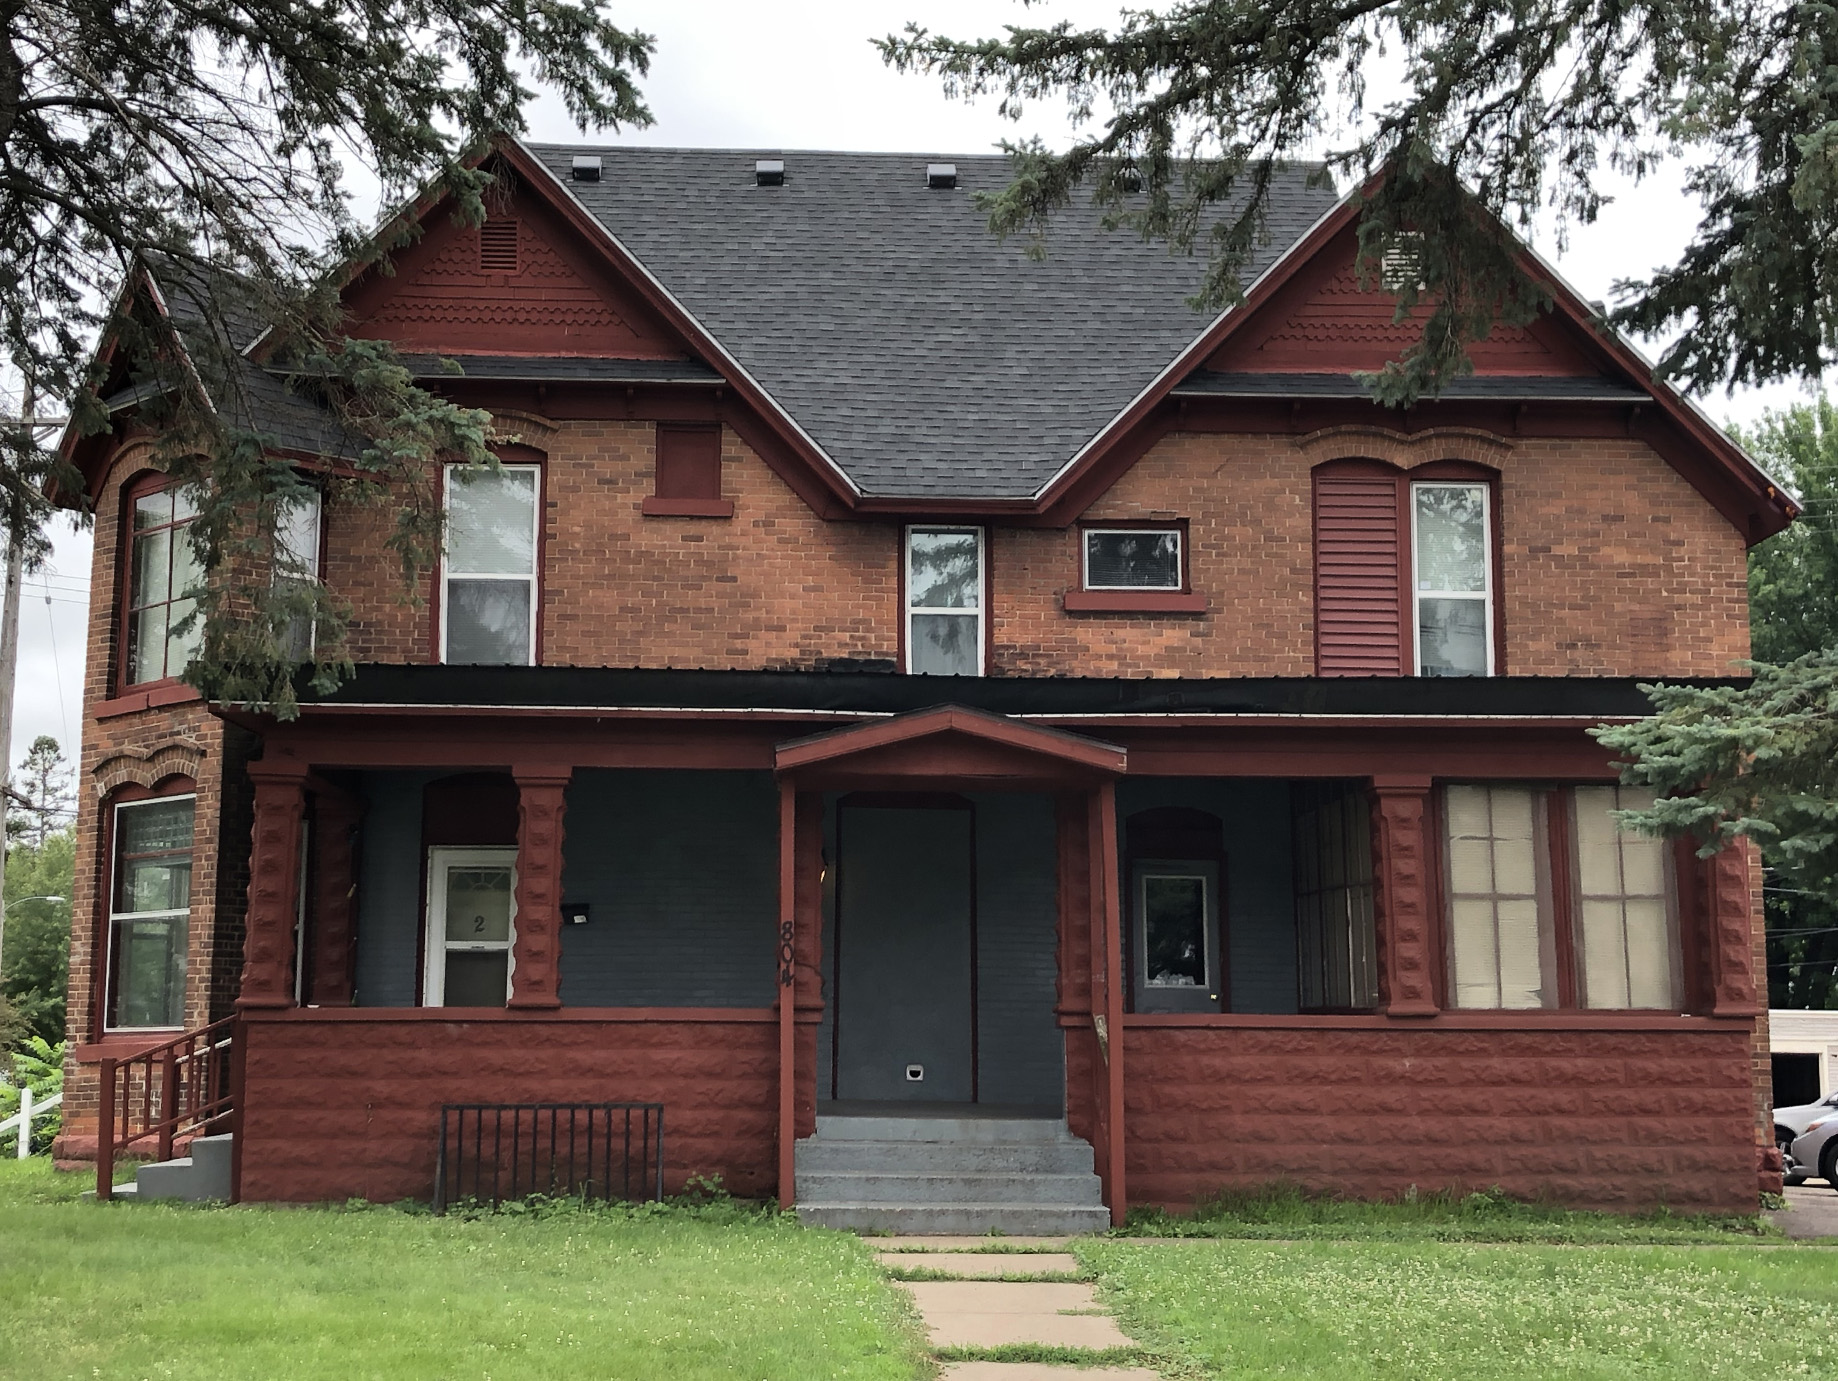 804 5th Ave, Eau Claire, Wisconsin 54703, 2 Bedrooms Bedrooms, ,1 BathroomBathrooms,Multi-Family,Apartment,804 5th Ave ,1121